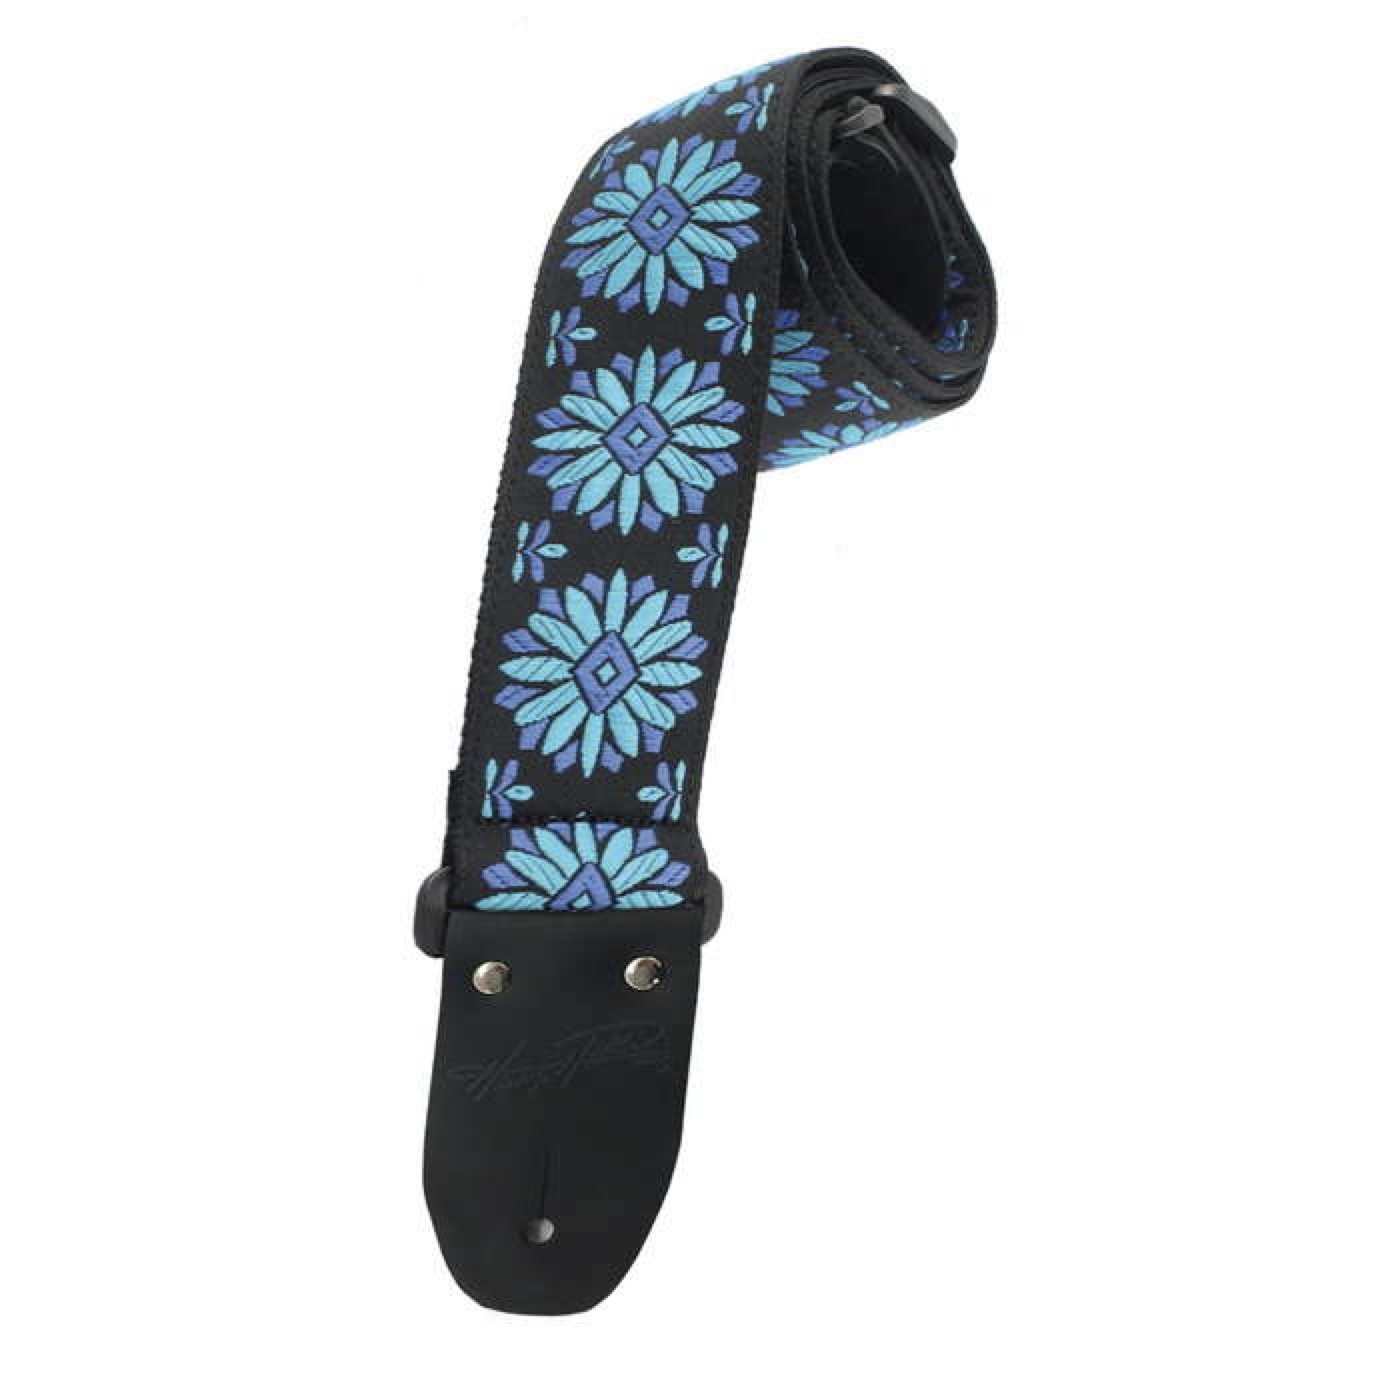 Henry Heller 2" Guitar Strap, Woven Jacquard with Tri-Glide and Nylon Backing, Blue/Black (USA)